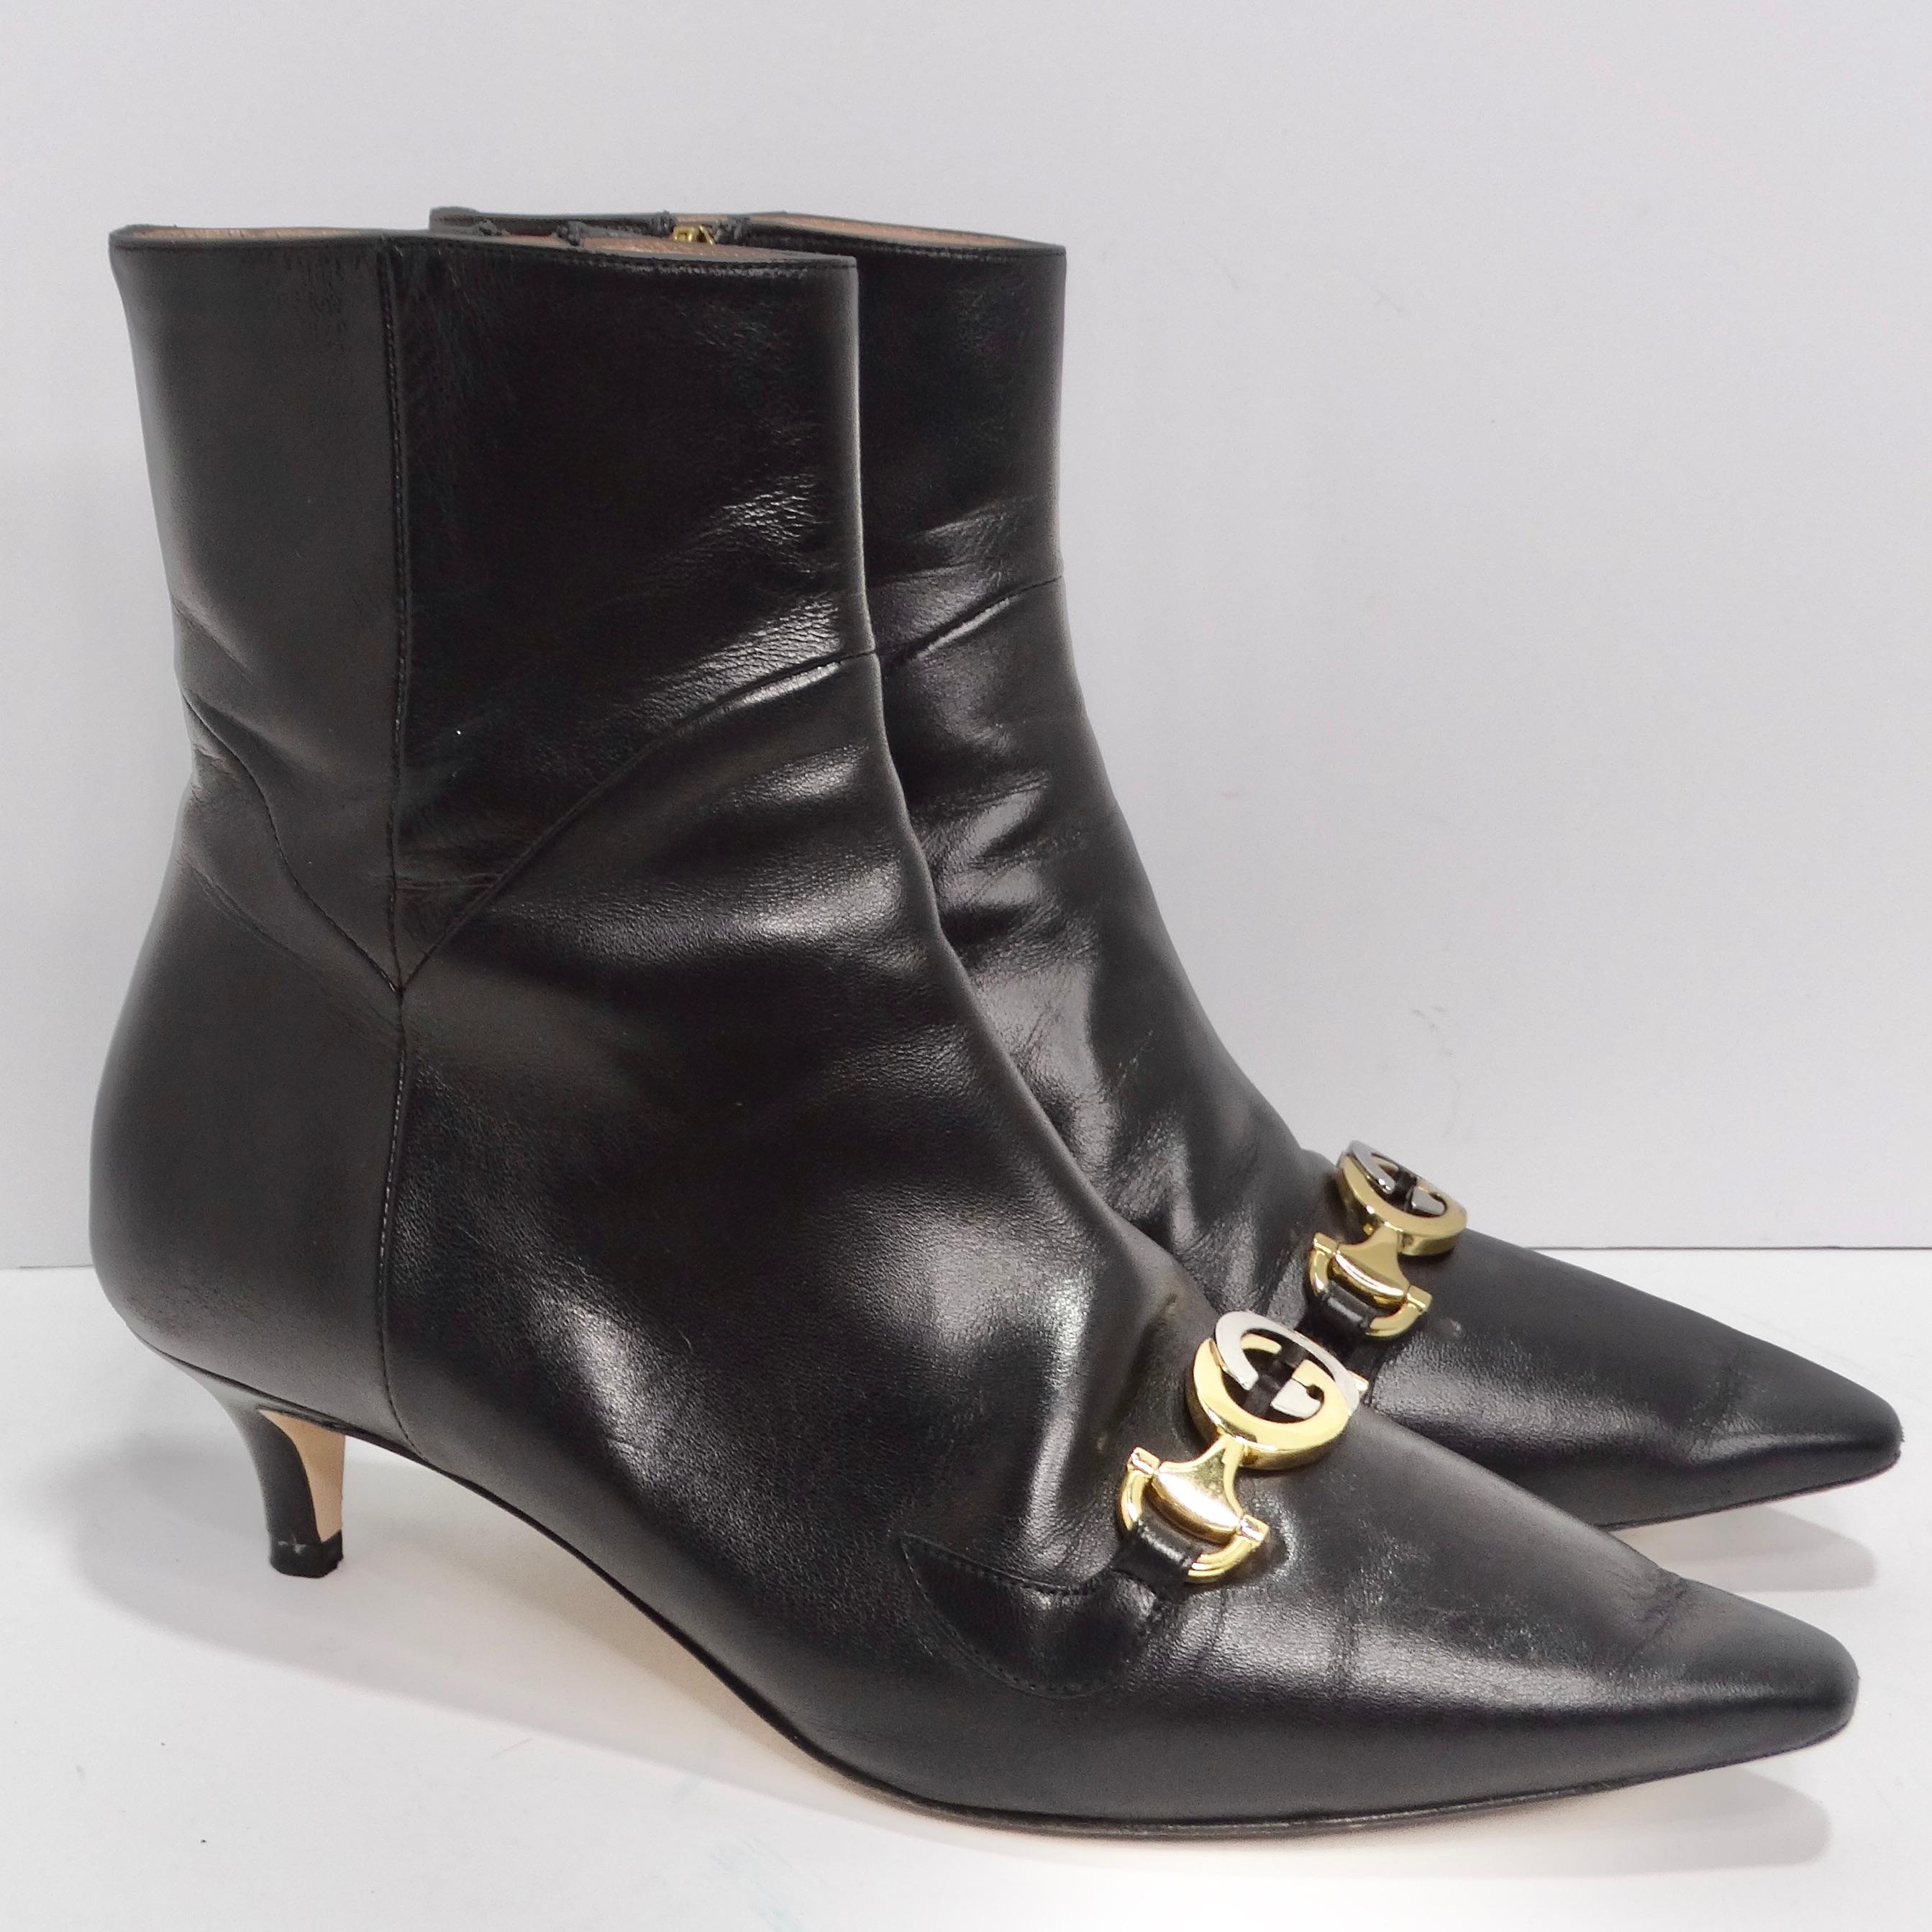 Gucci Leather Zumi Kitten Heel Ankle Boots For Sale 1